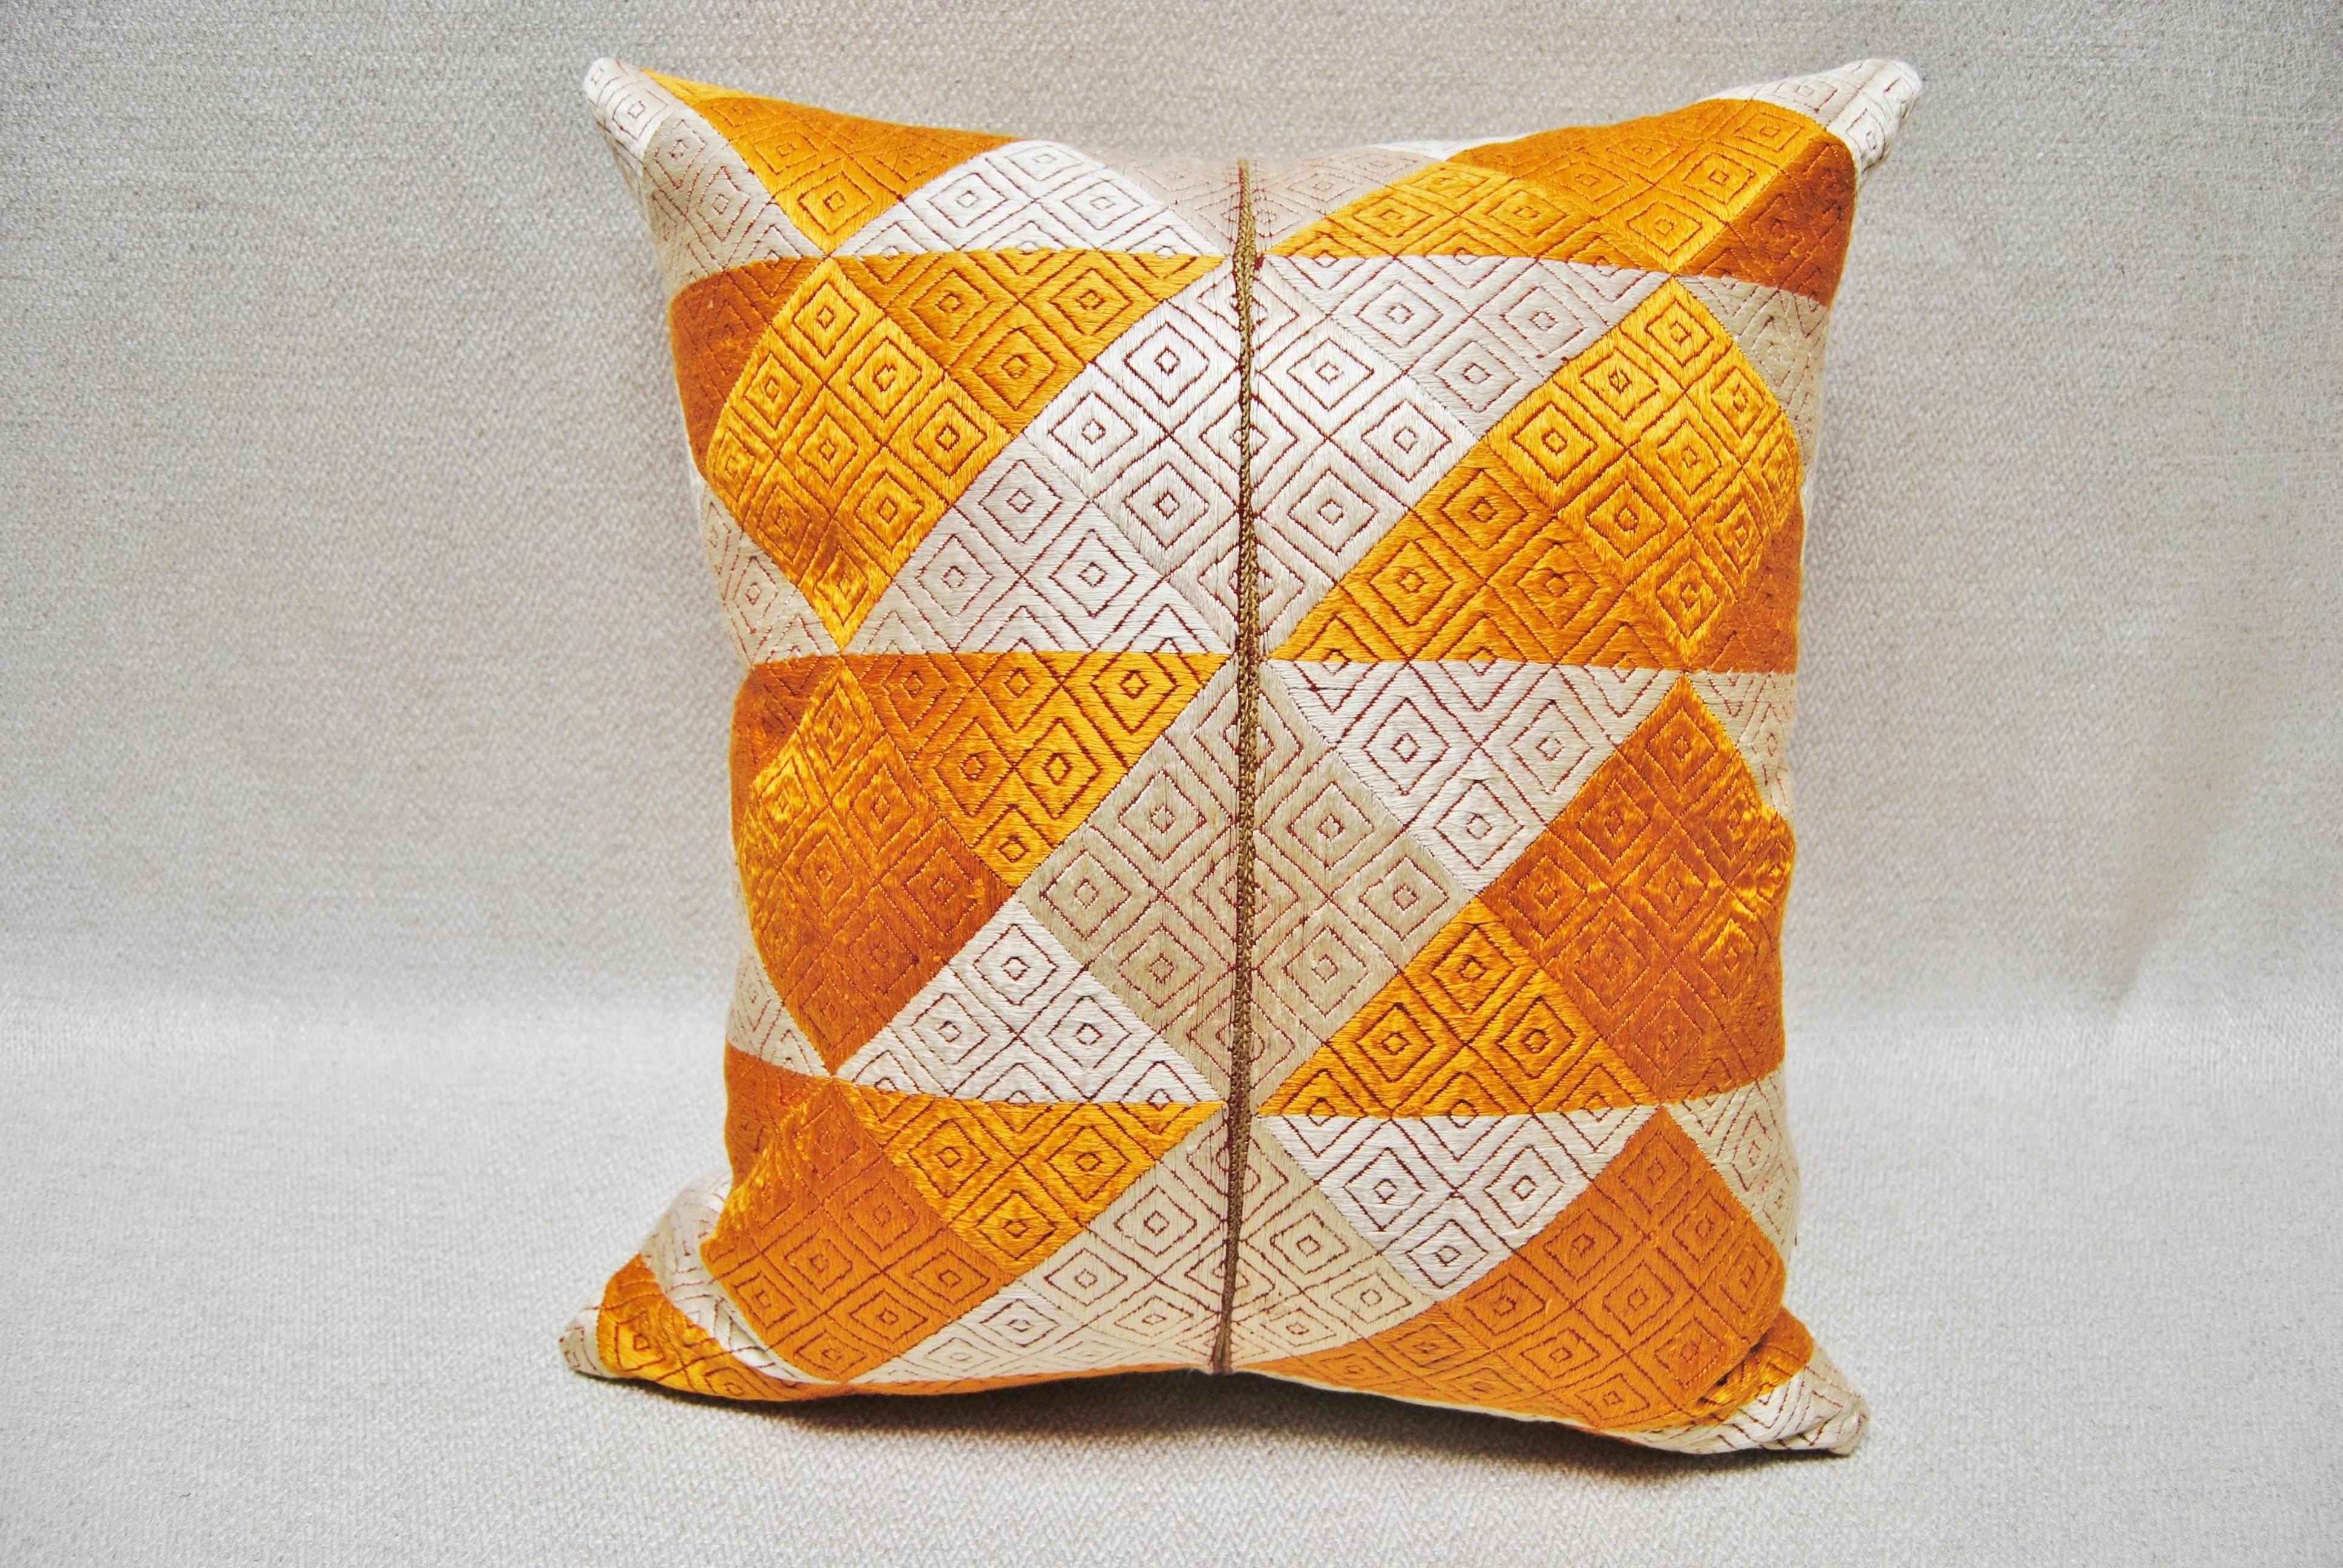 Custom pillow cut from a vintage hand embroidered Phulkari Bagh wedding shawl from Punjab, India. The shawl is hand embroidered with vibrant silk threads on hand-loomed cotton khadi cloth, covering the entire cloth with color. It is made by members